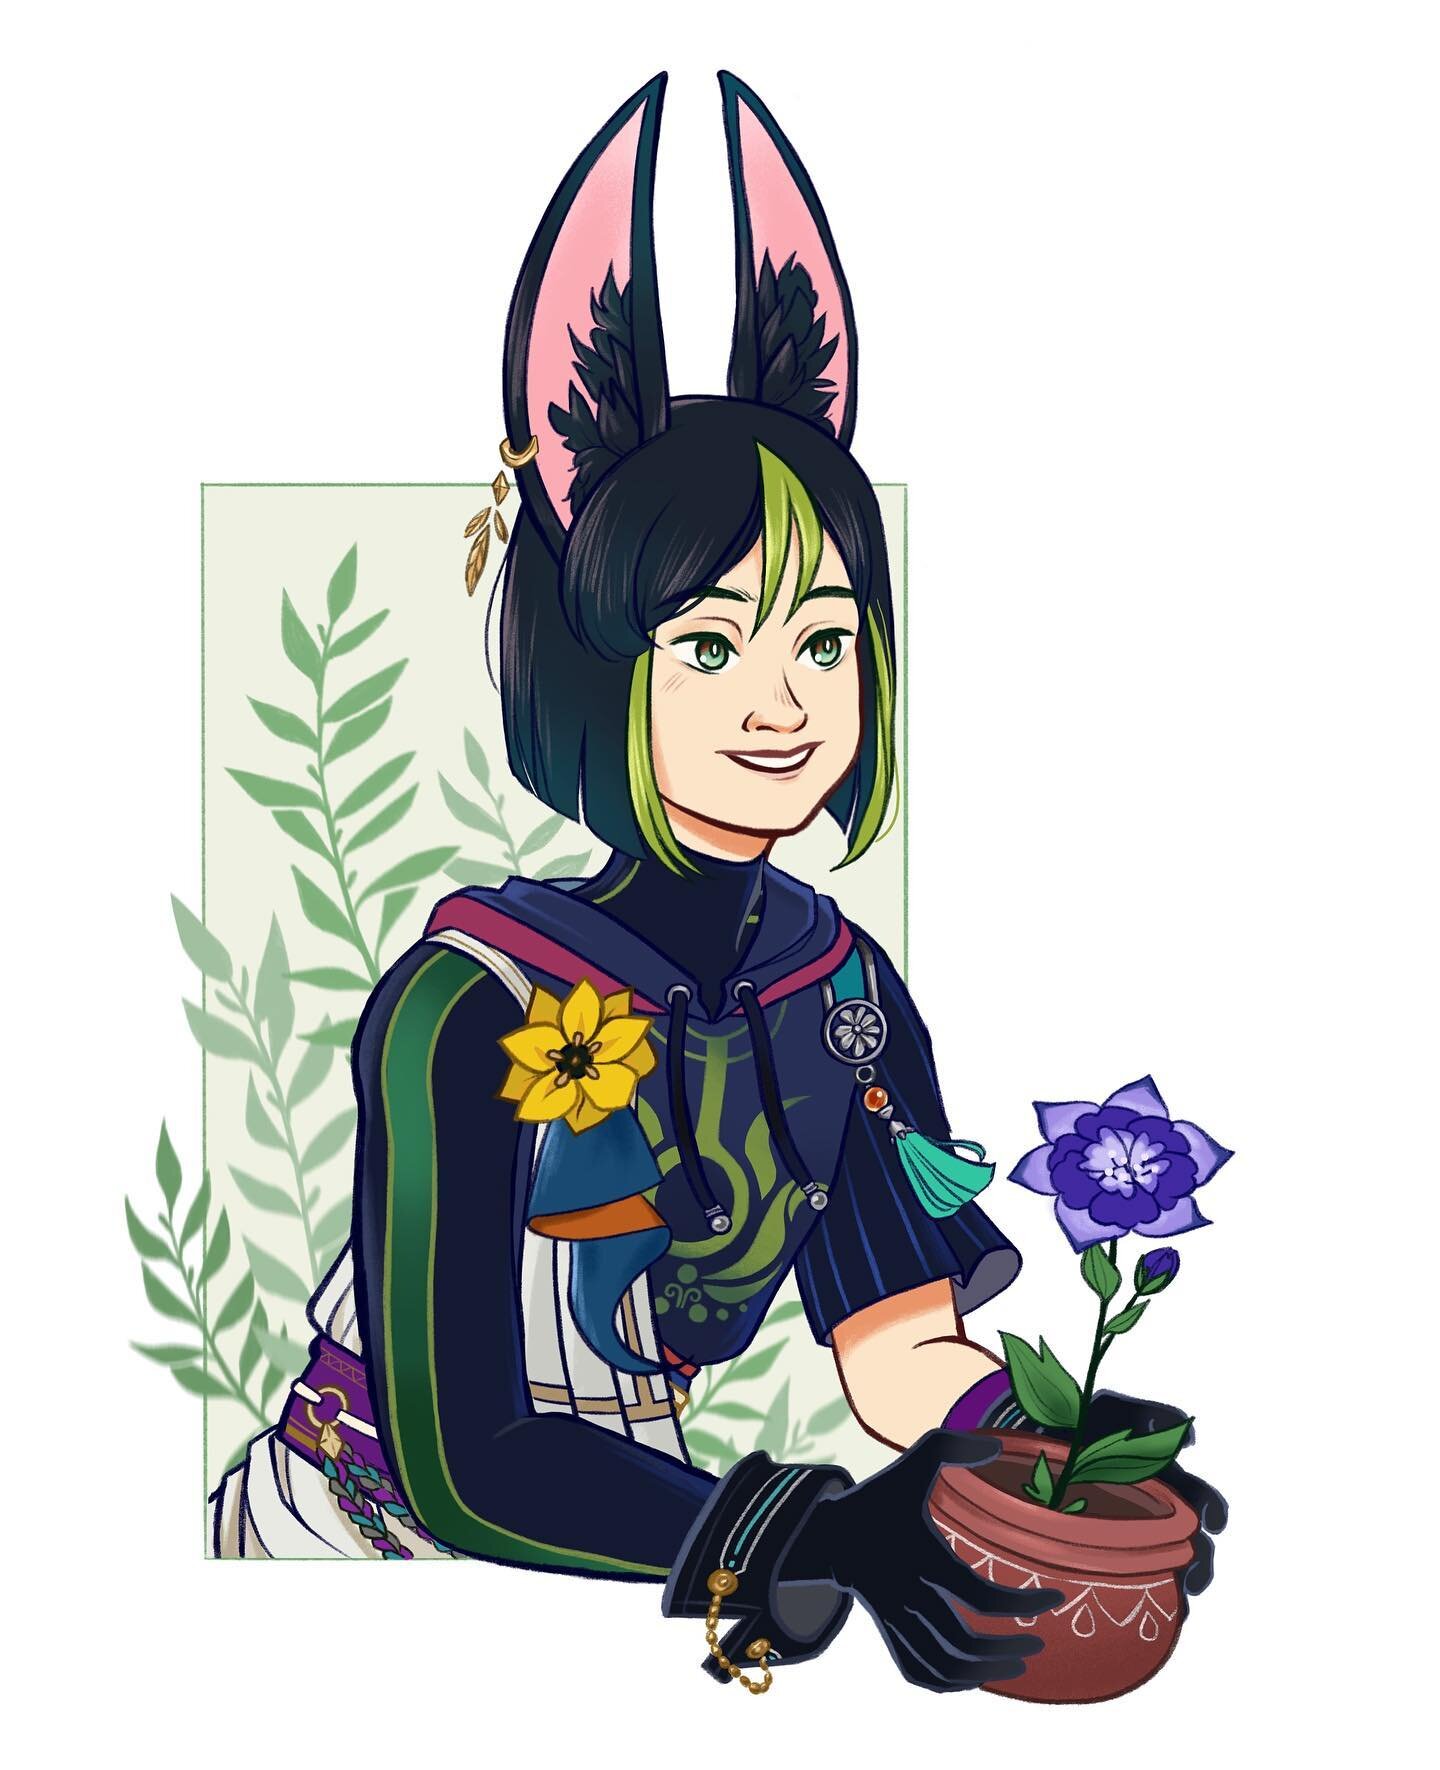 &ldquo;I picked out a potted plant in full bloom for you, along with a gardening guide.&mdash;This plant comes with a Forest Watcher lifetime guarantee.&rdquo; 

This is an honest prayer that I get Tighnari before the banner disappears. I love how si